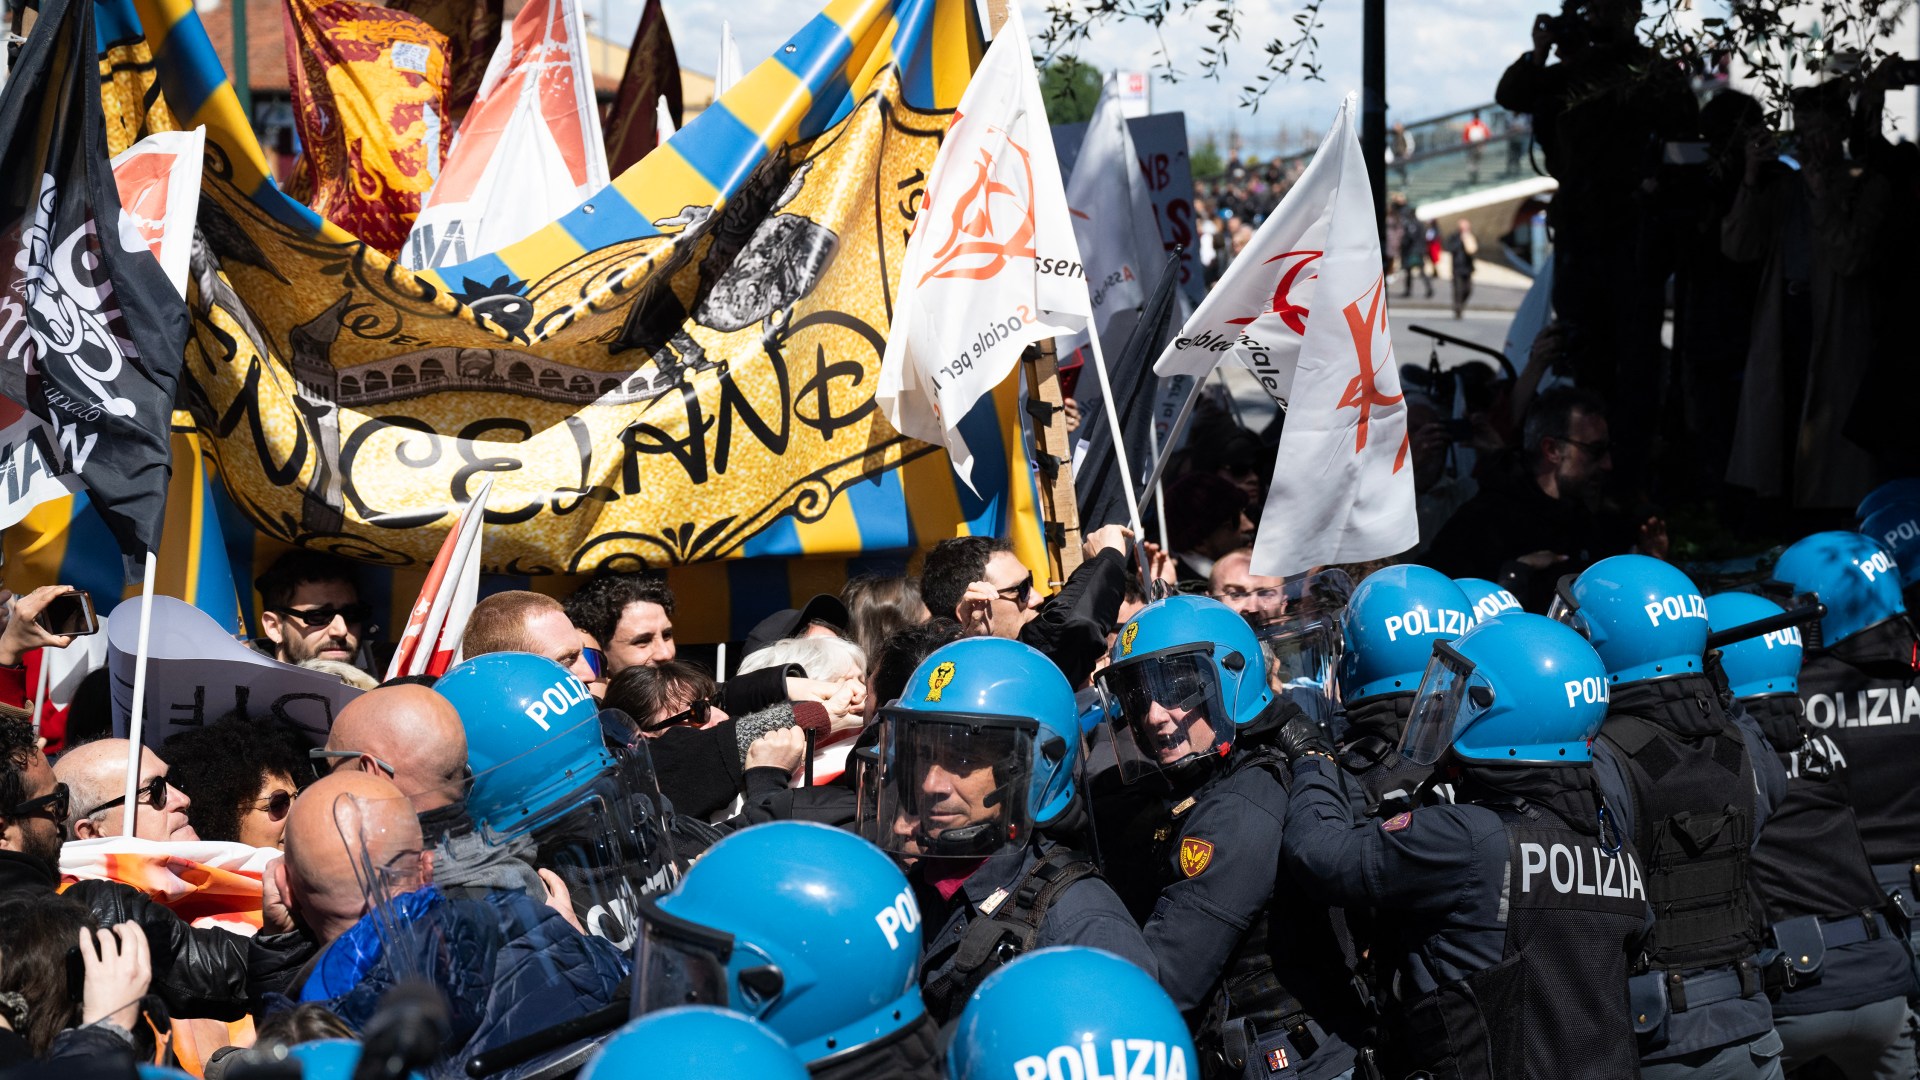 European tourism, protest, clash, cops, tourist tax, ex-mayor. New Tourist Tax Sparks Chaotic Clash Between Protesters and Police at Popular European Holiday Destination! 🚨🌍 #EuropeanTourism #ProtestClash #TouristTaxTurmoil